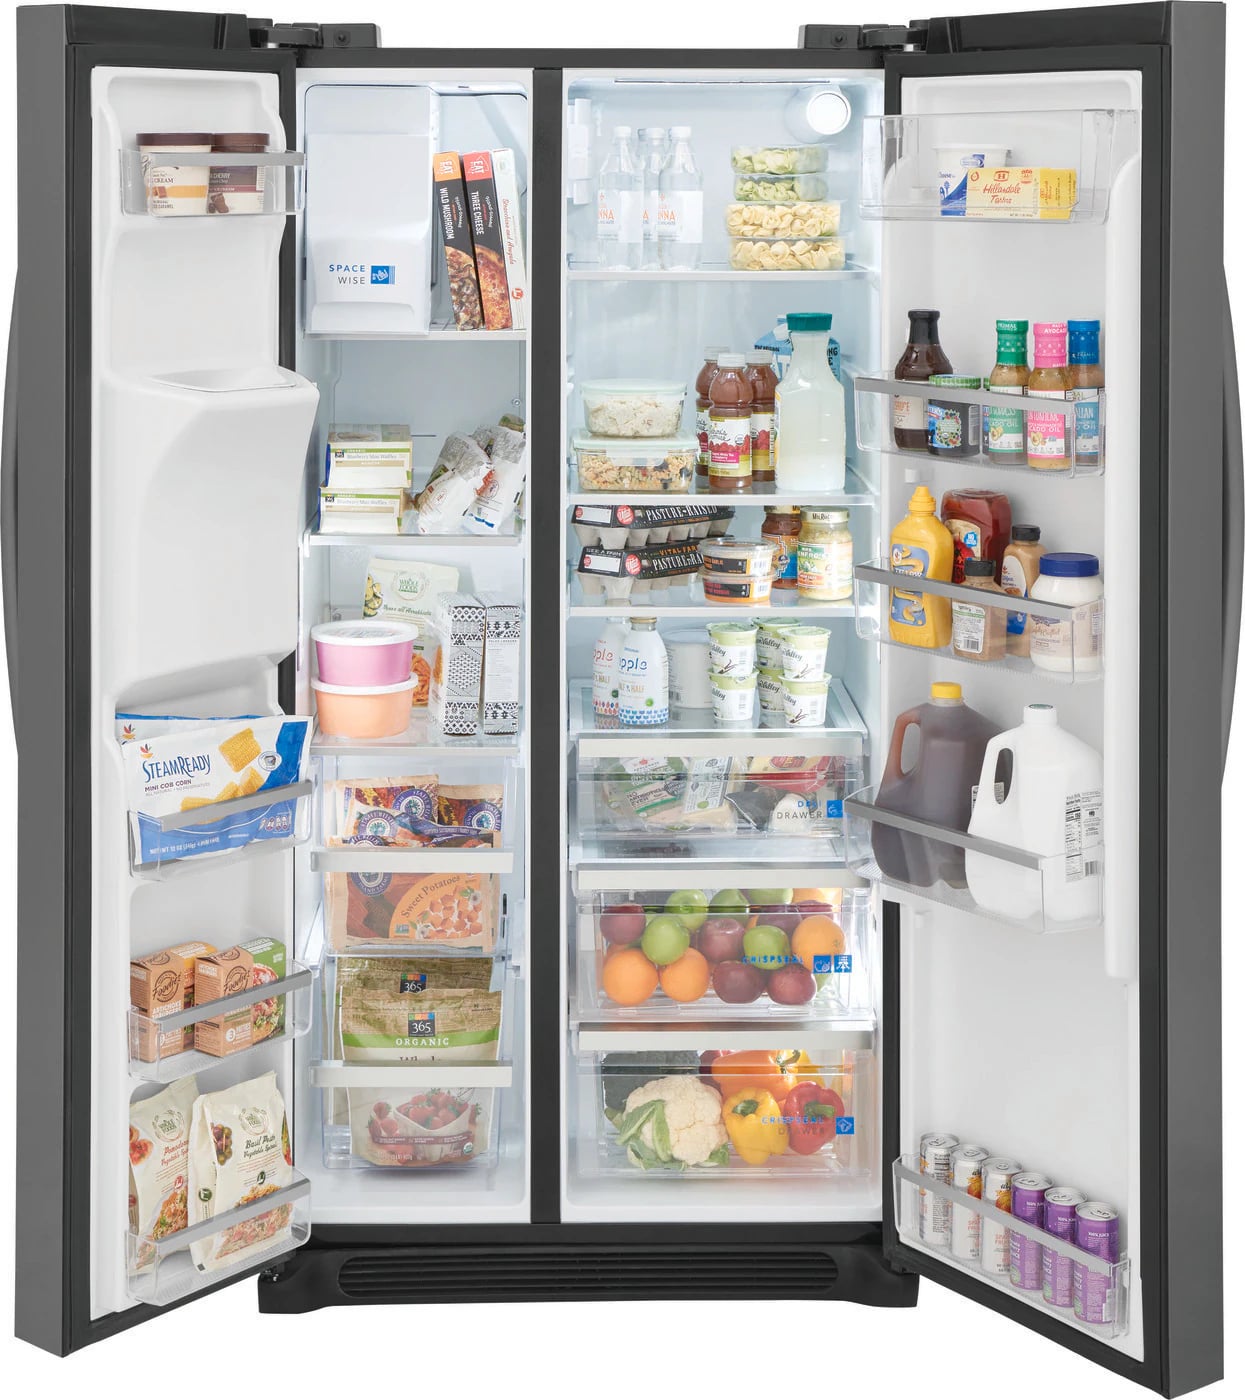 Frigidaire Gallery - 36.2 Inch 22.3 cu. ft Side by Side Refrigerator in Black Stainless - GRSC2352AD